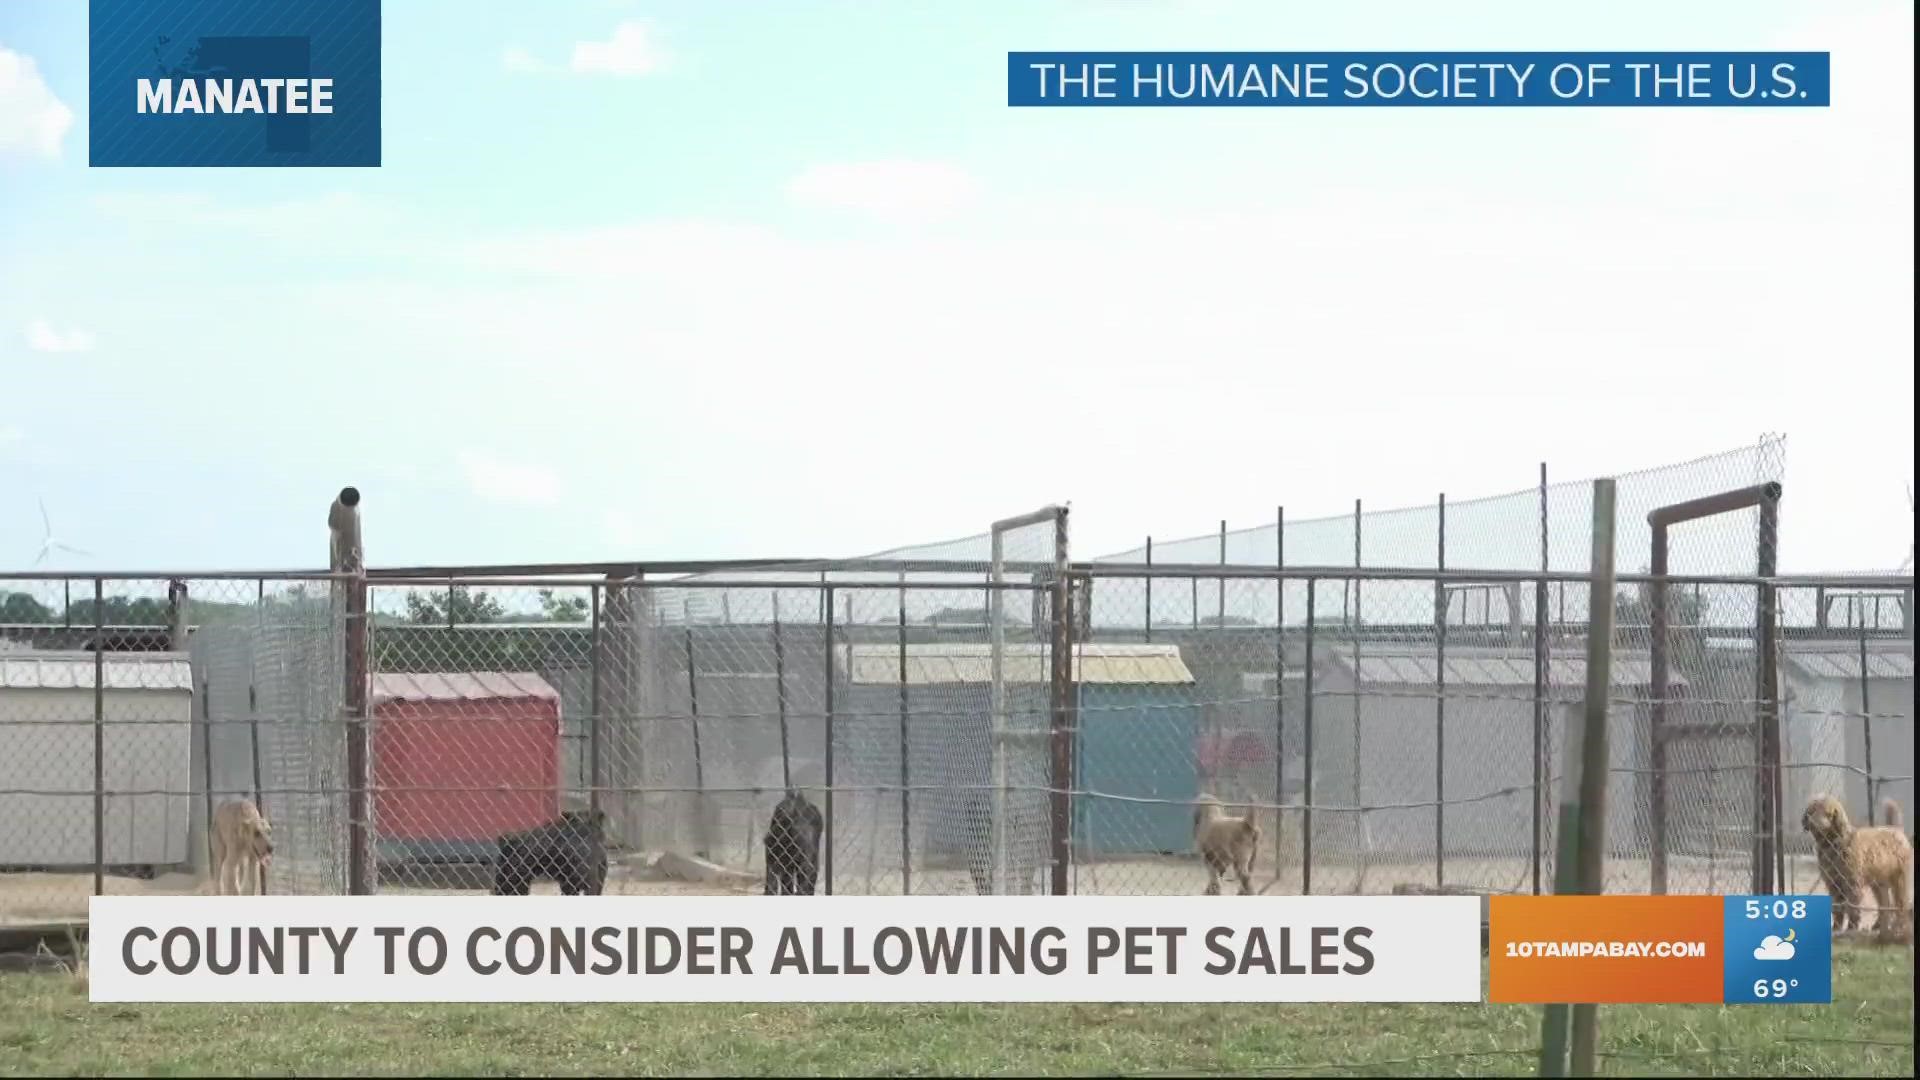 The county banned pet sales in 2021.